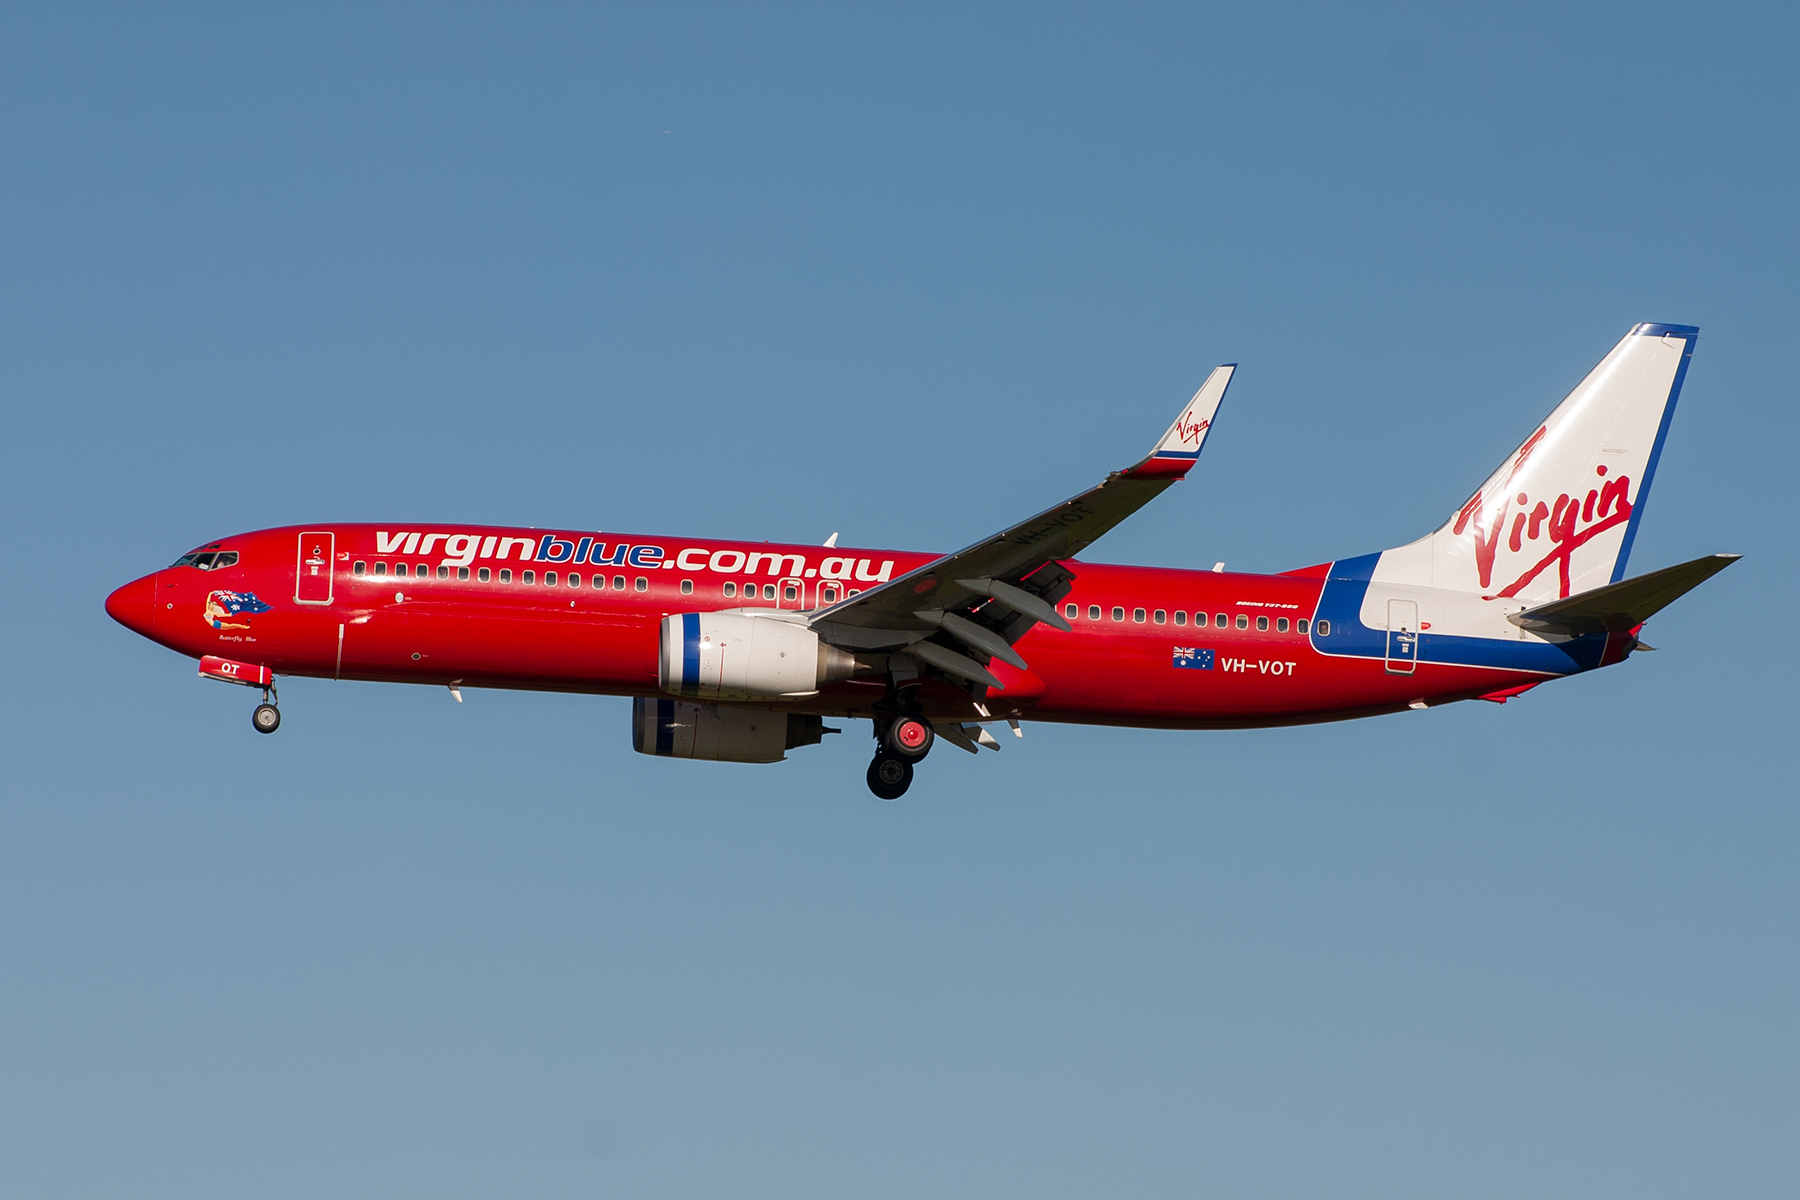 Virgin Blue Airlines Boeing 737-800 VH-VOT at Kingsford Smith